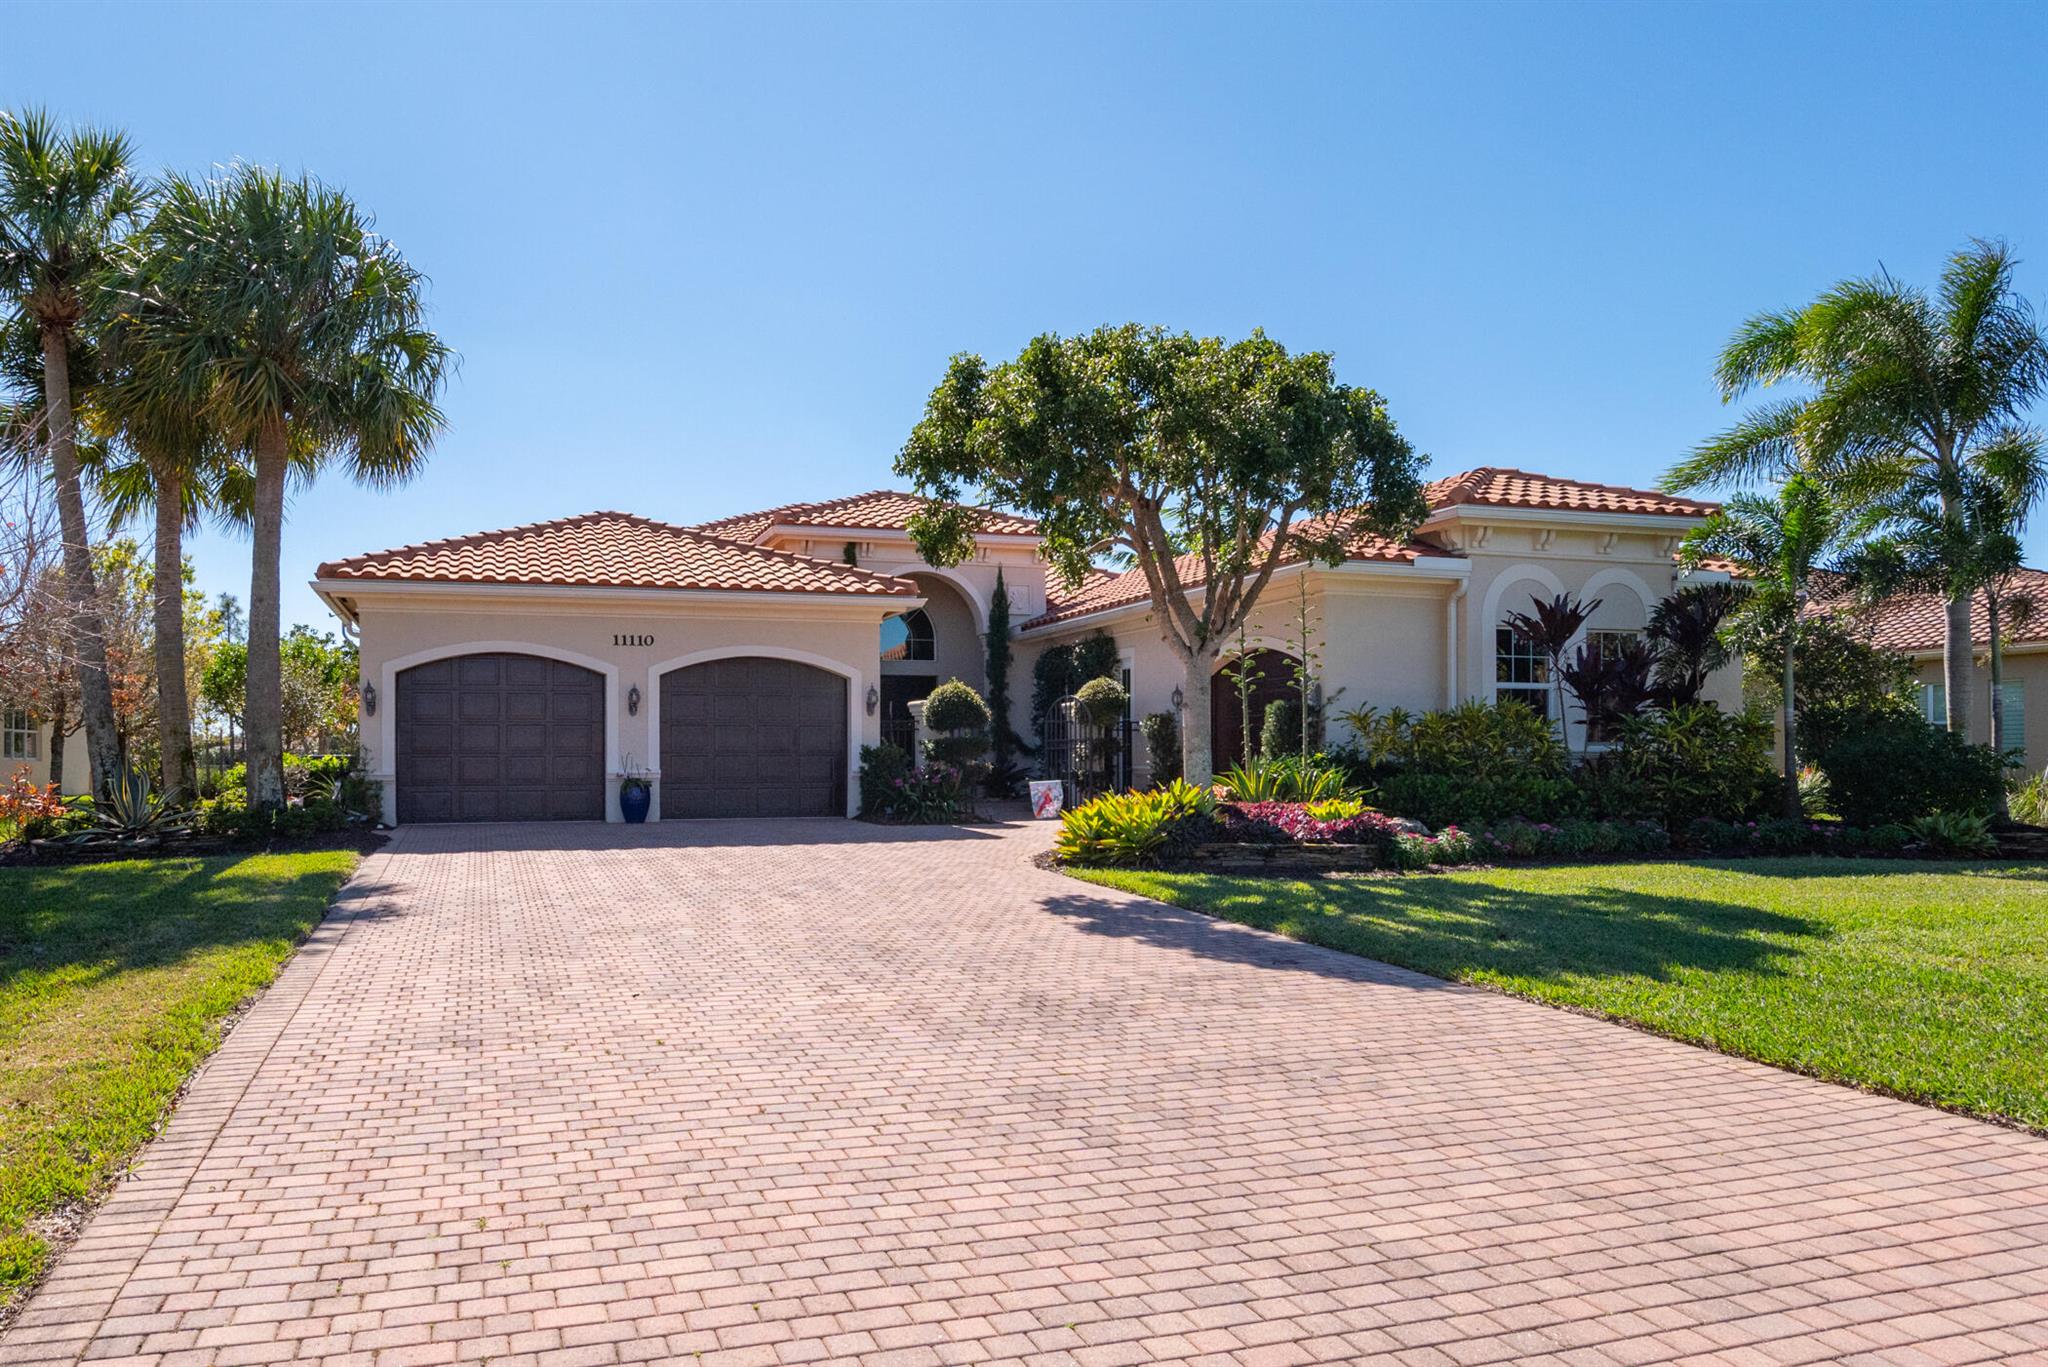 Long sparkling lake views from this beautiful 3BR/3.5BA Plus Club Room home set on a half-acre lot in Palm Beach Gardens! Enjoy the southern exposure and warm Florida breezes relaxing by the screen enclosed pool and extended lanai. This popular Magnolia Model was built in 2014 by GL Homes and features FULL IMPACT WINDOWS and DOORS, a THREE CAR GARAGE, large 24X24 Polished Porcelain tile in the main living areas and bamboo wood floors in the primary suite. Recent updating to the home includes NEW A/C SYSTEM, new front-loading LG Washer/Dryer, new dishwasher, new pool pump and lush landscaping on this outstanding waterfront lot. Very peaceful manned gated community with very low HOA Fees, tennis/pickleball court, basketball court, playground and sports field for the whole family to enjoy!!